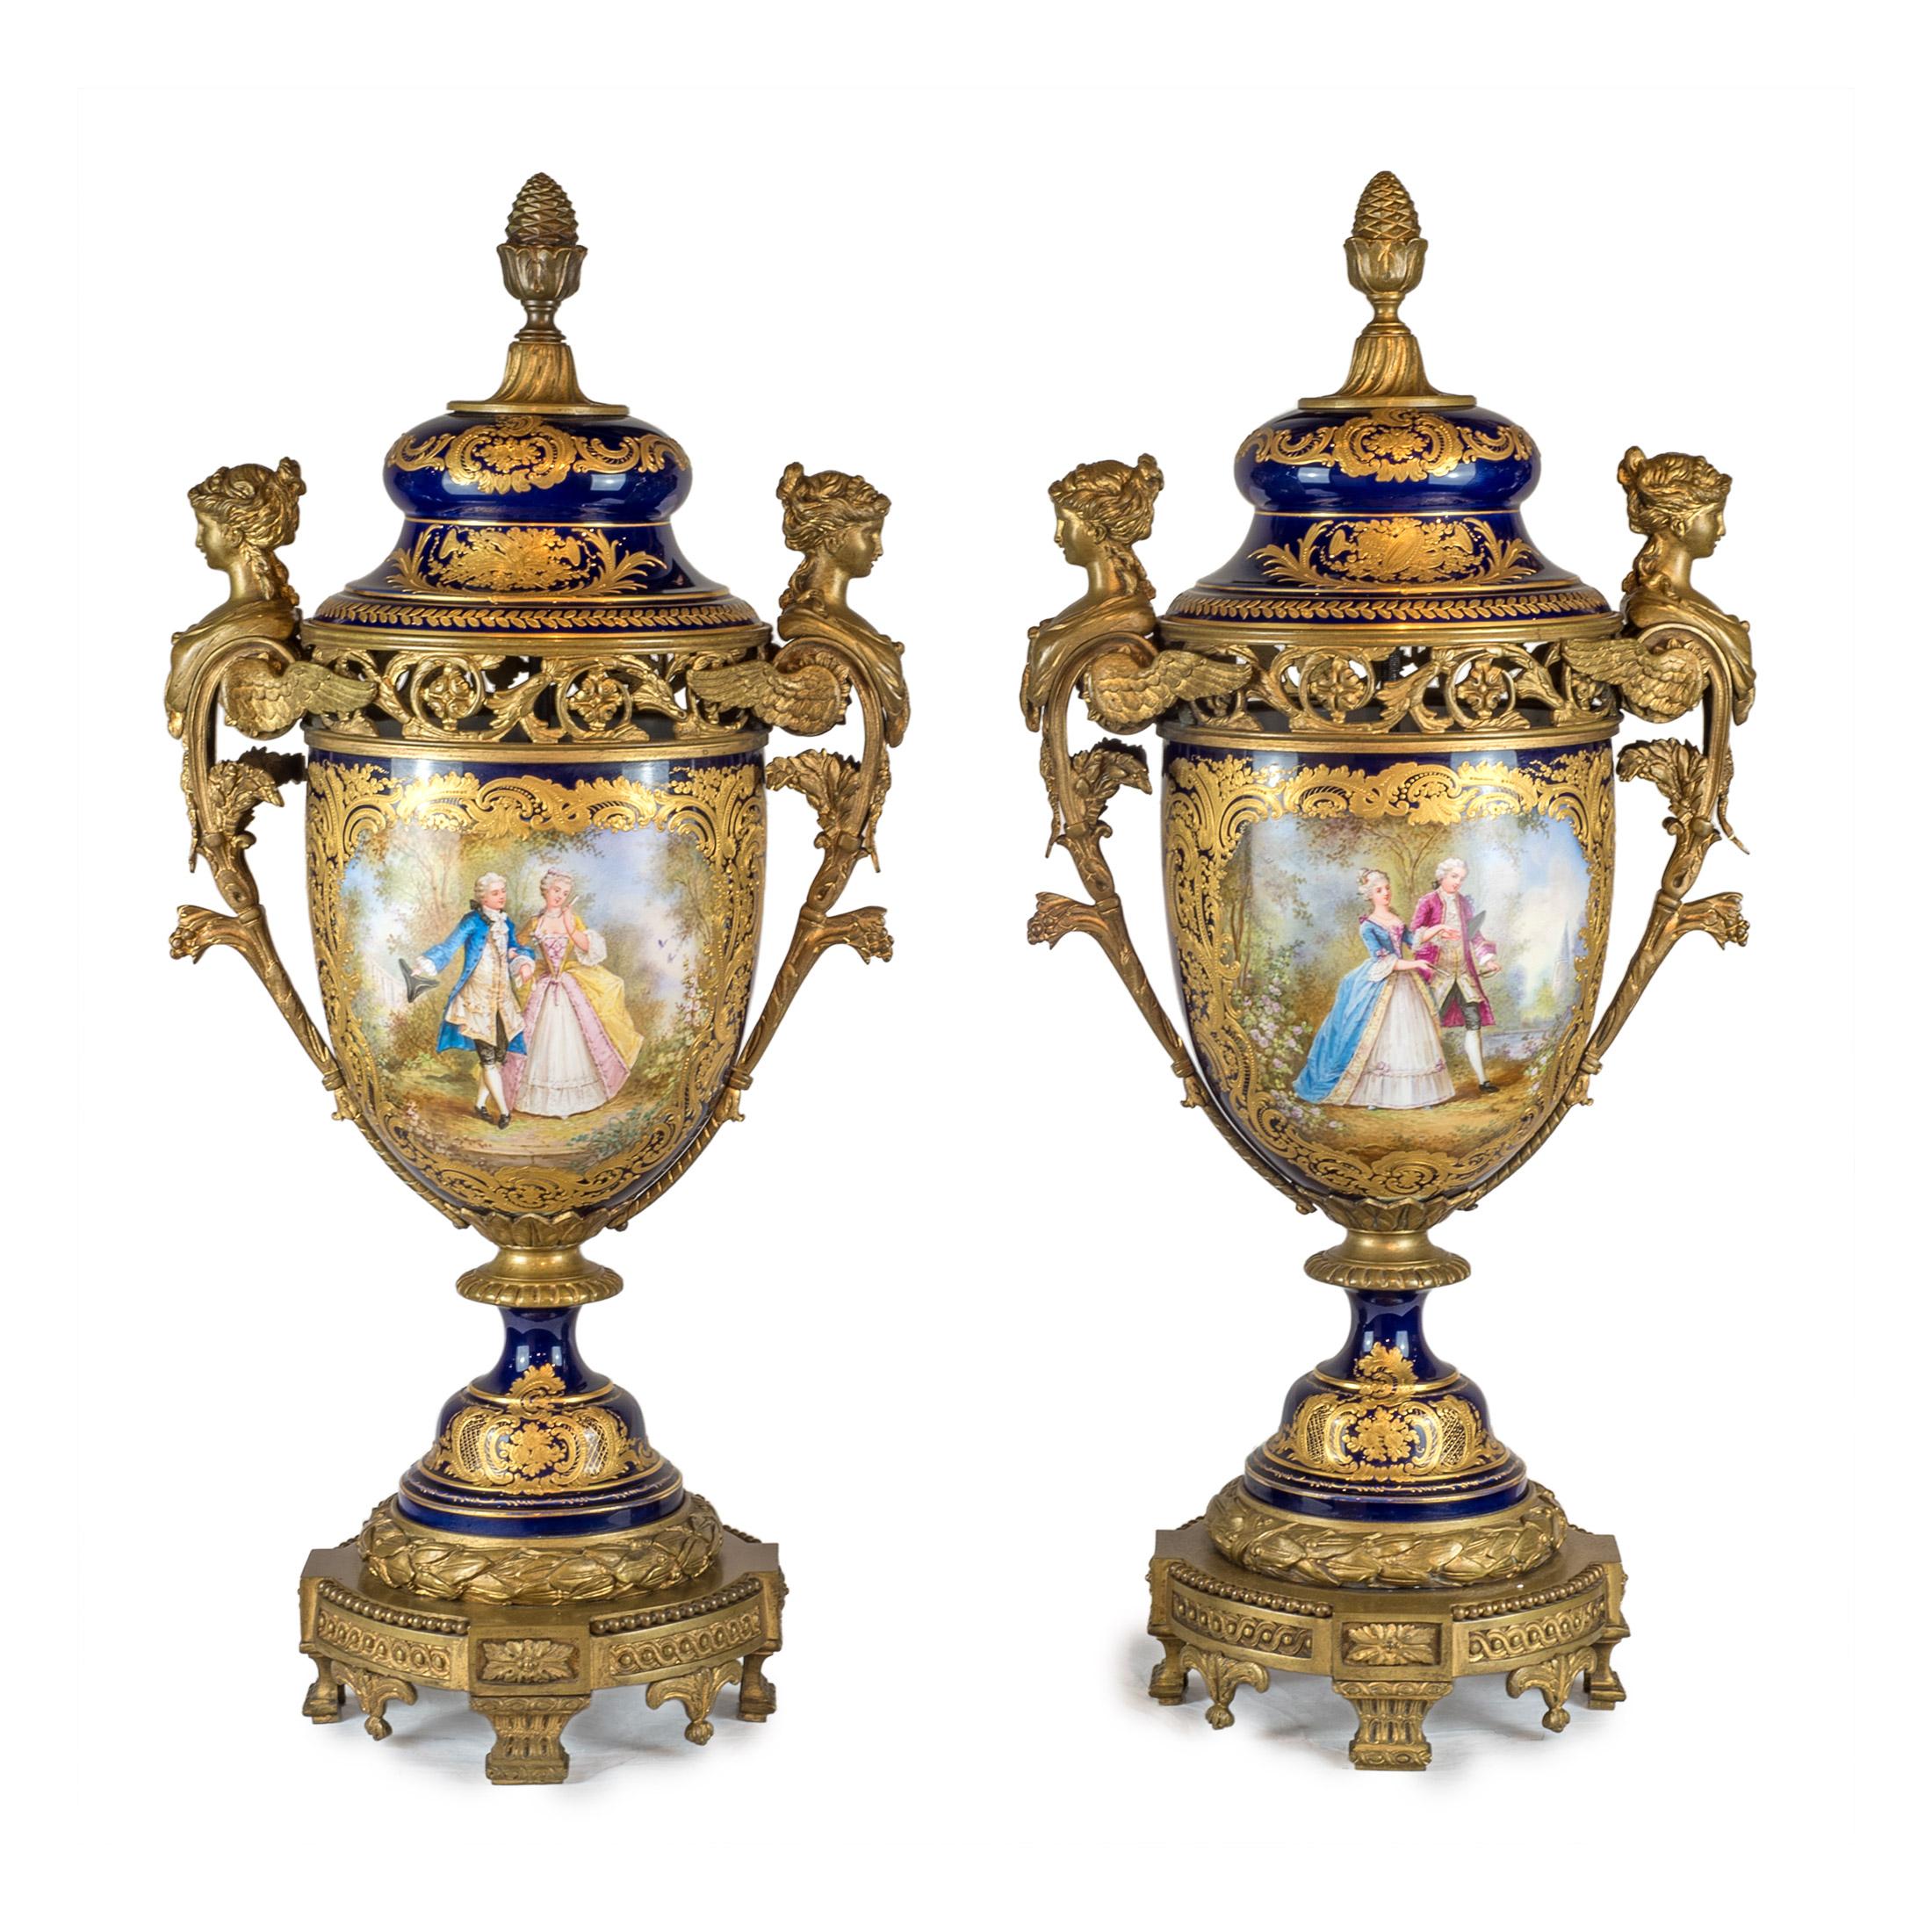 A fine and important Sèvres style bronze mounted and cobalt porcelain with hand painted courting figures in landscapes.

Origin: French
Date: 19th century
Dimension: Centerpiece: 21 in x 23 in, vases: 29 in. x 13 in.